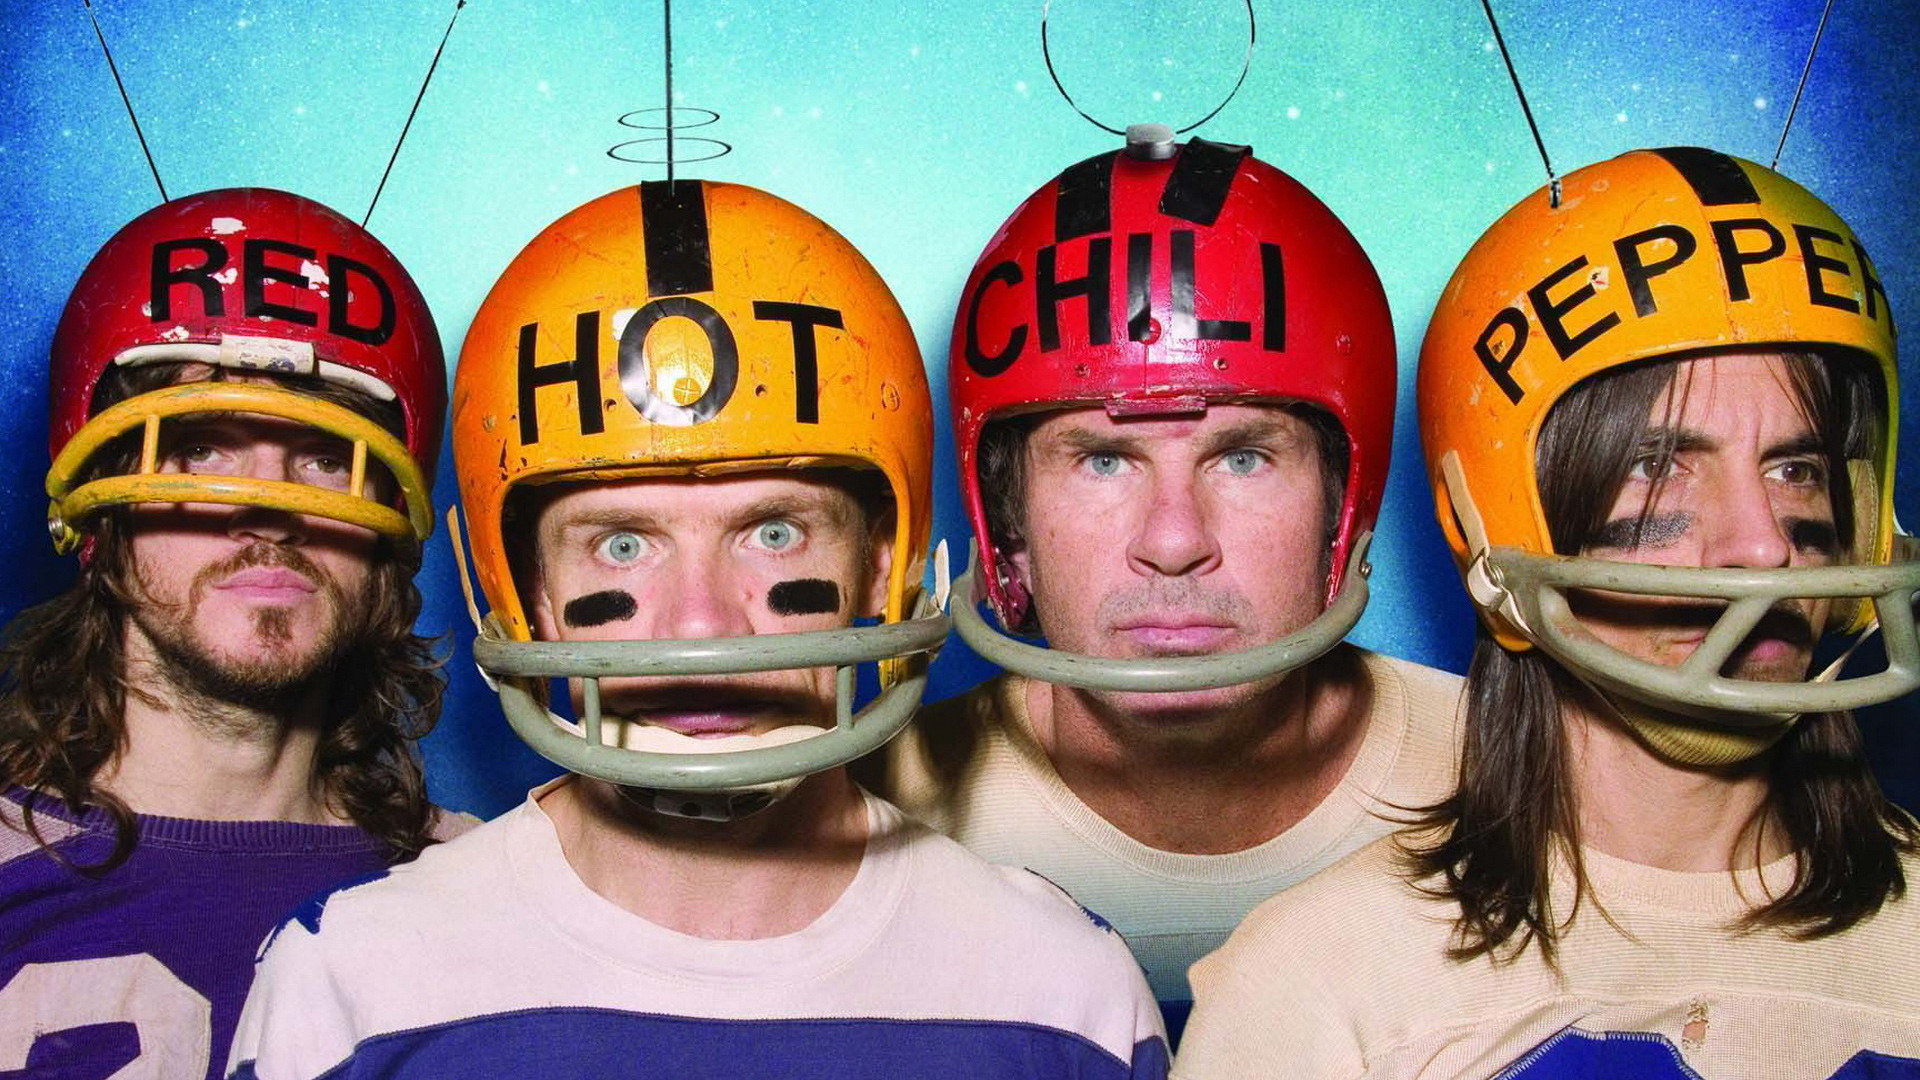 Download hd 1080p Red Hot Chili Peppers desktop background ID:20186 for free